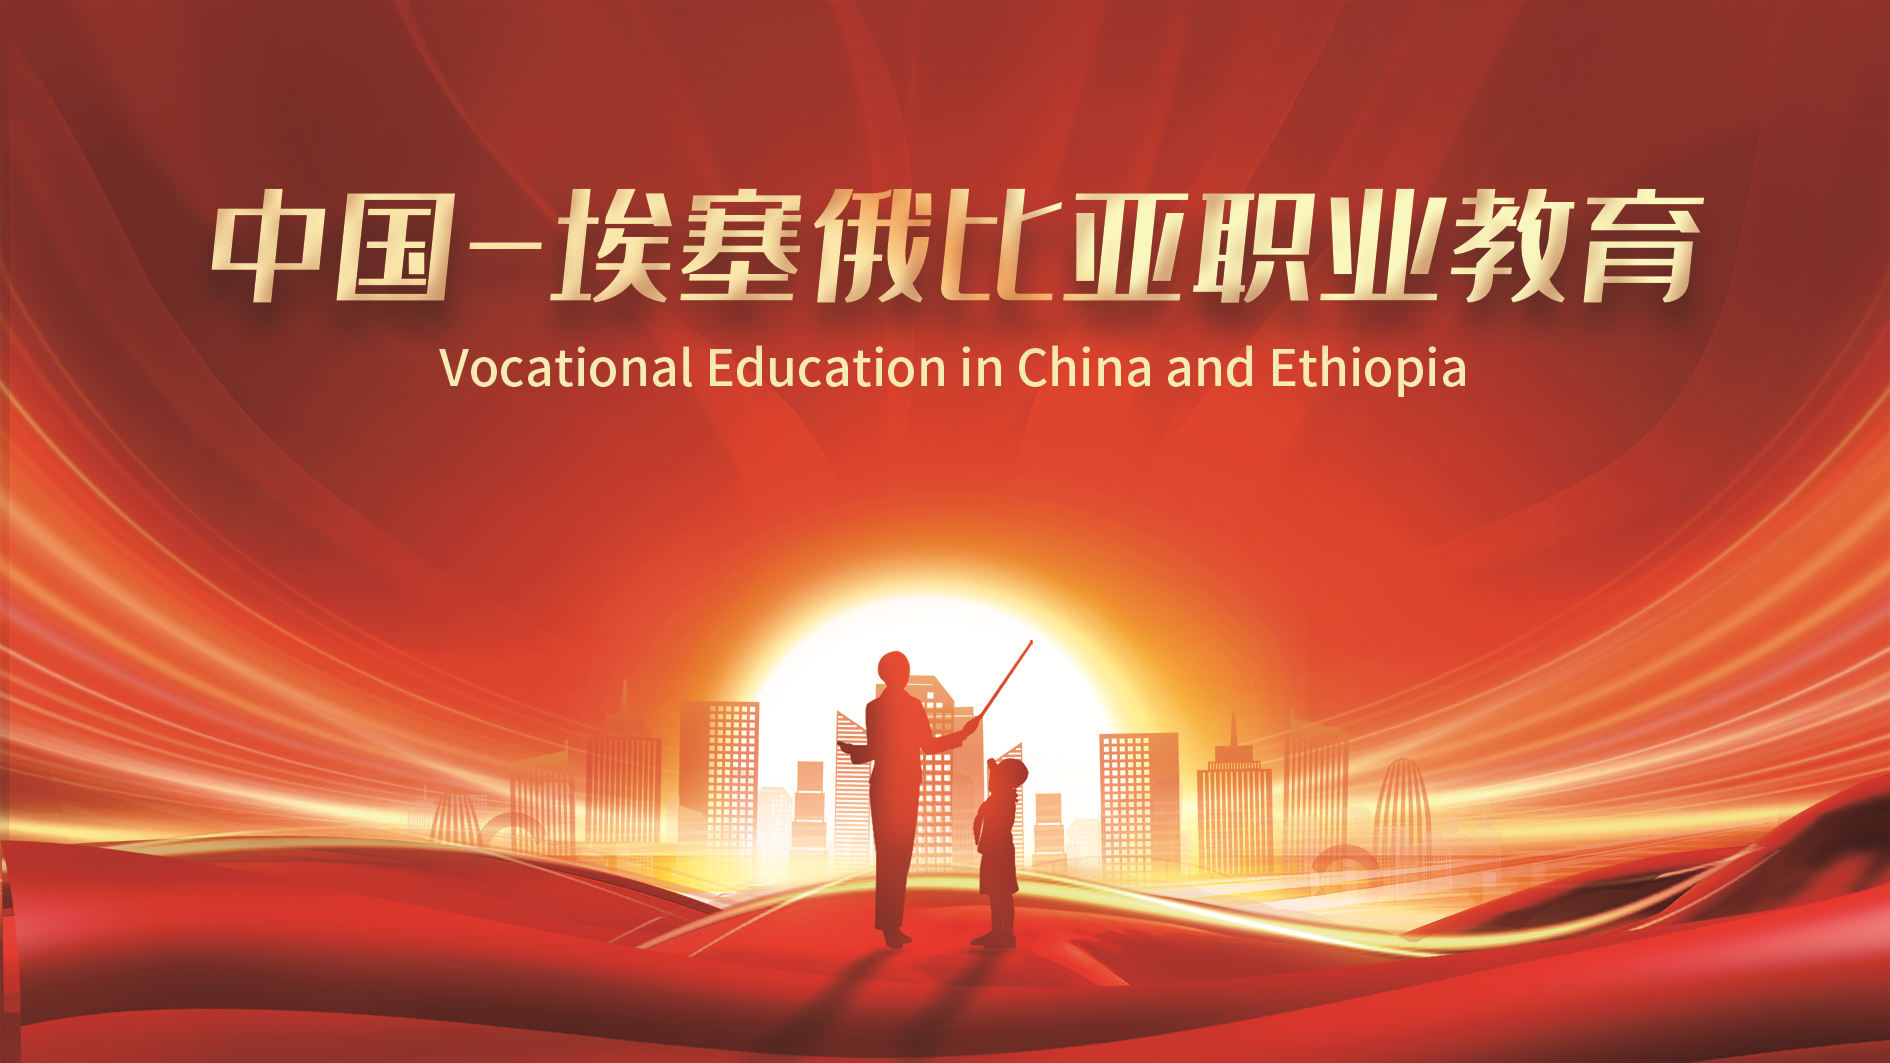 Vocational Education in China and Ethiopia